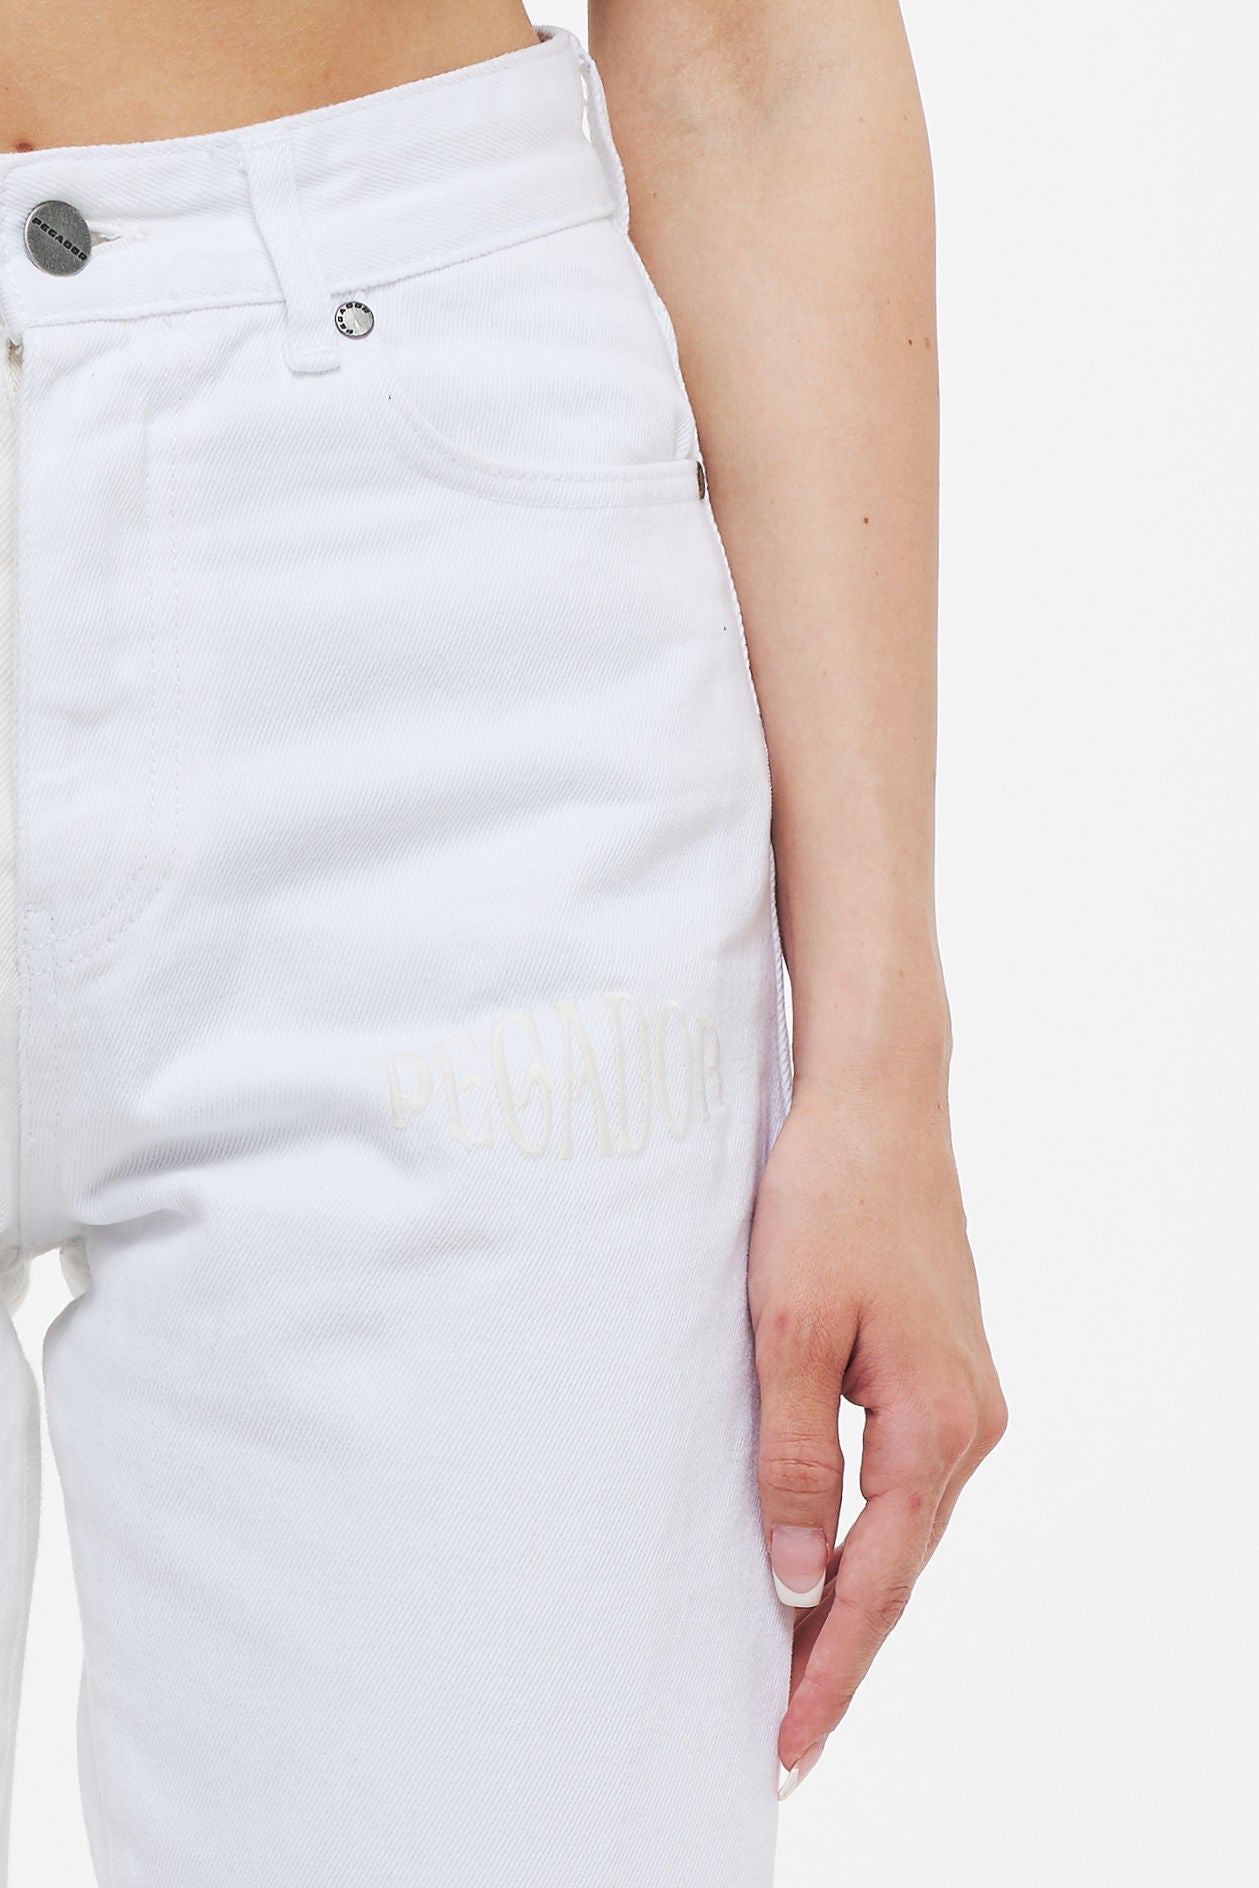 Lid Two Tone Wide Jeans Washed Pearl White Jeans | Woman Ahead of Time Female 